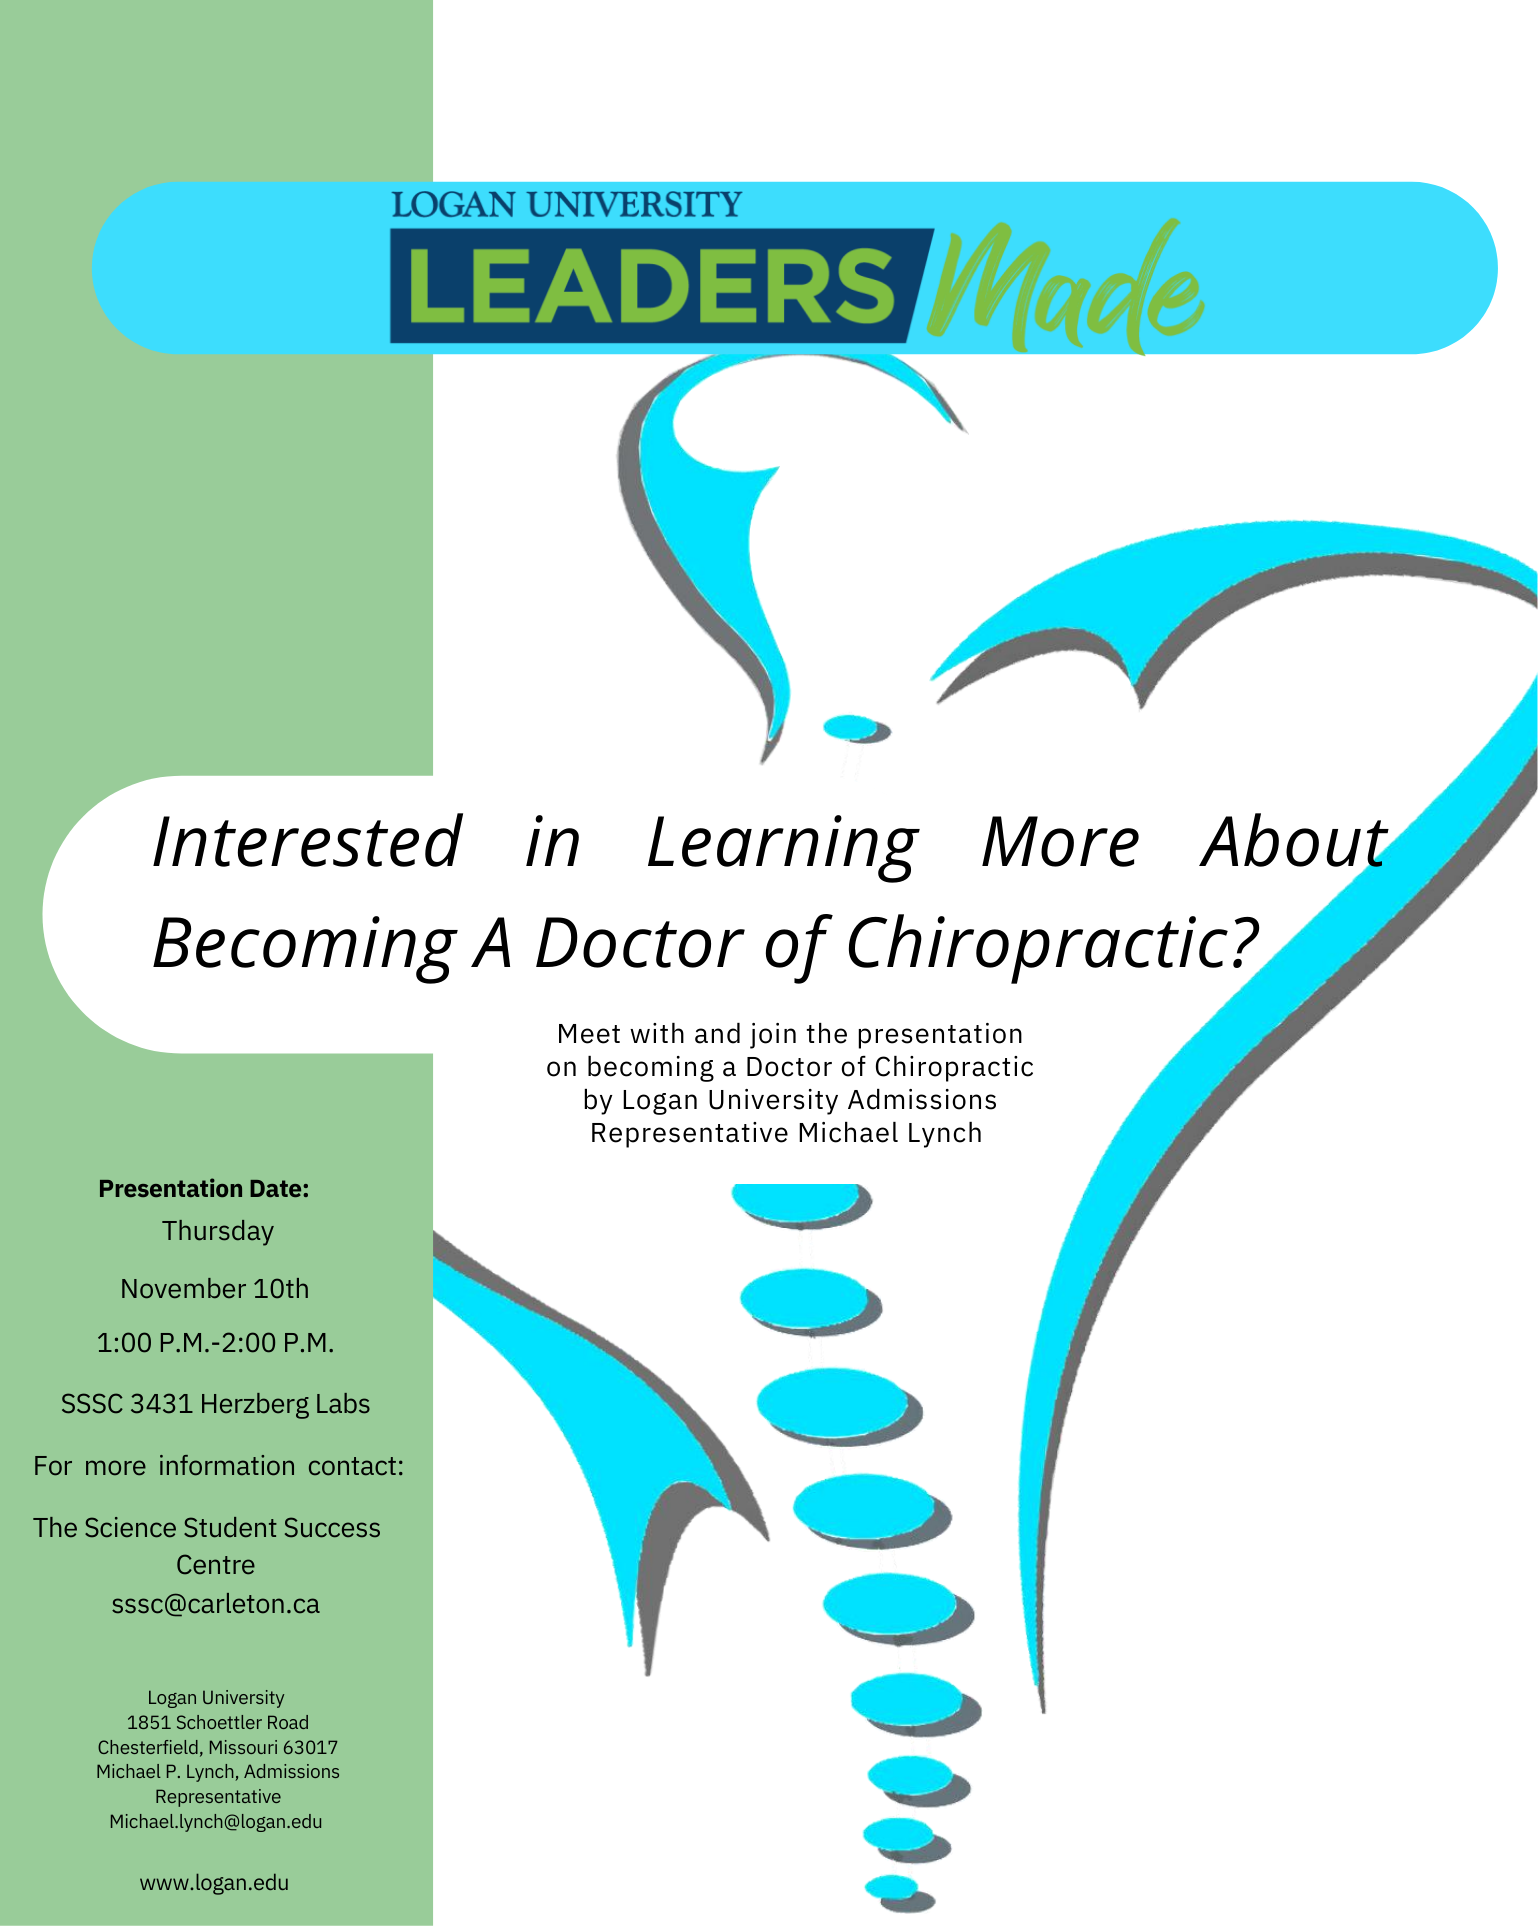 Poster with text. The text reads "Logan Universtiy Leaders Made. Interested in learning more about becoming a doctor of chiropractic? Meet with and join the presenetation on becoming a Doctor of Chiropractic by Logan University Admissions Representative Michael Lynch.  Presentation Date: Thursday, November 10th, 1:00pm to 2:00pm. SSSC 3431 Herzberg Labs. For more information contact: The Science Student Success Centre. Logan University, 1851 Schoettler Road, Chesterfield, Missouri 63017. Michael P. Lynch, Admissions Representative. Contact the SSSC for Michael's email. www.logan.edu